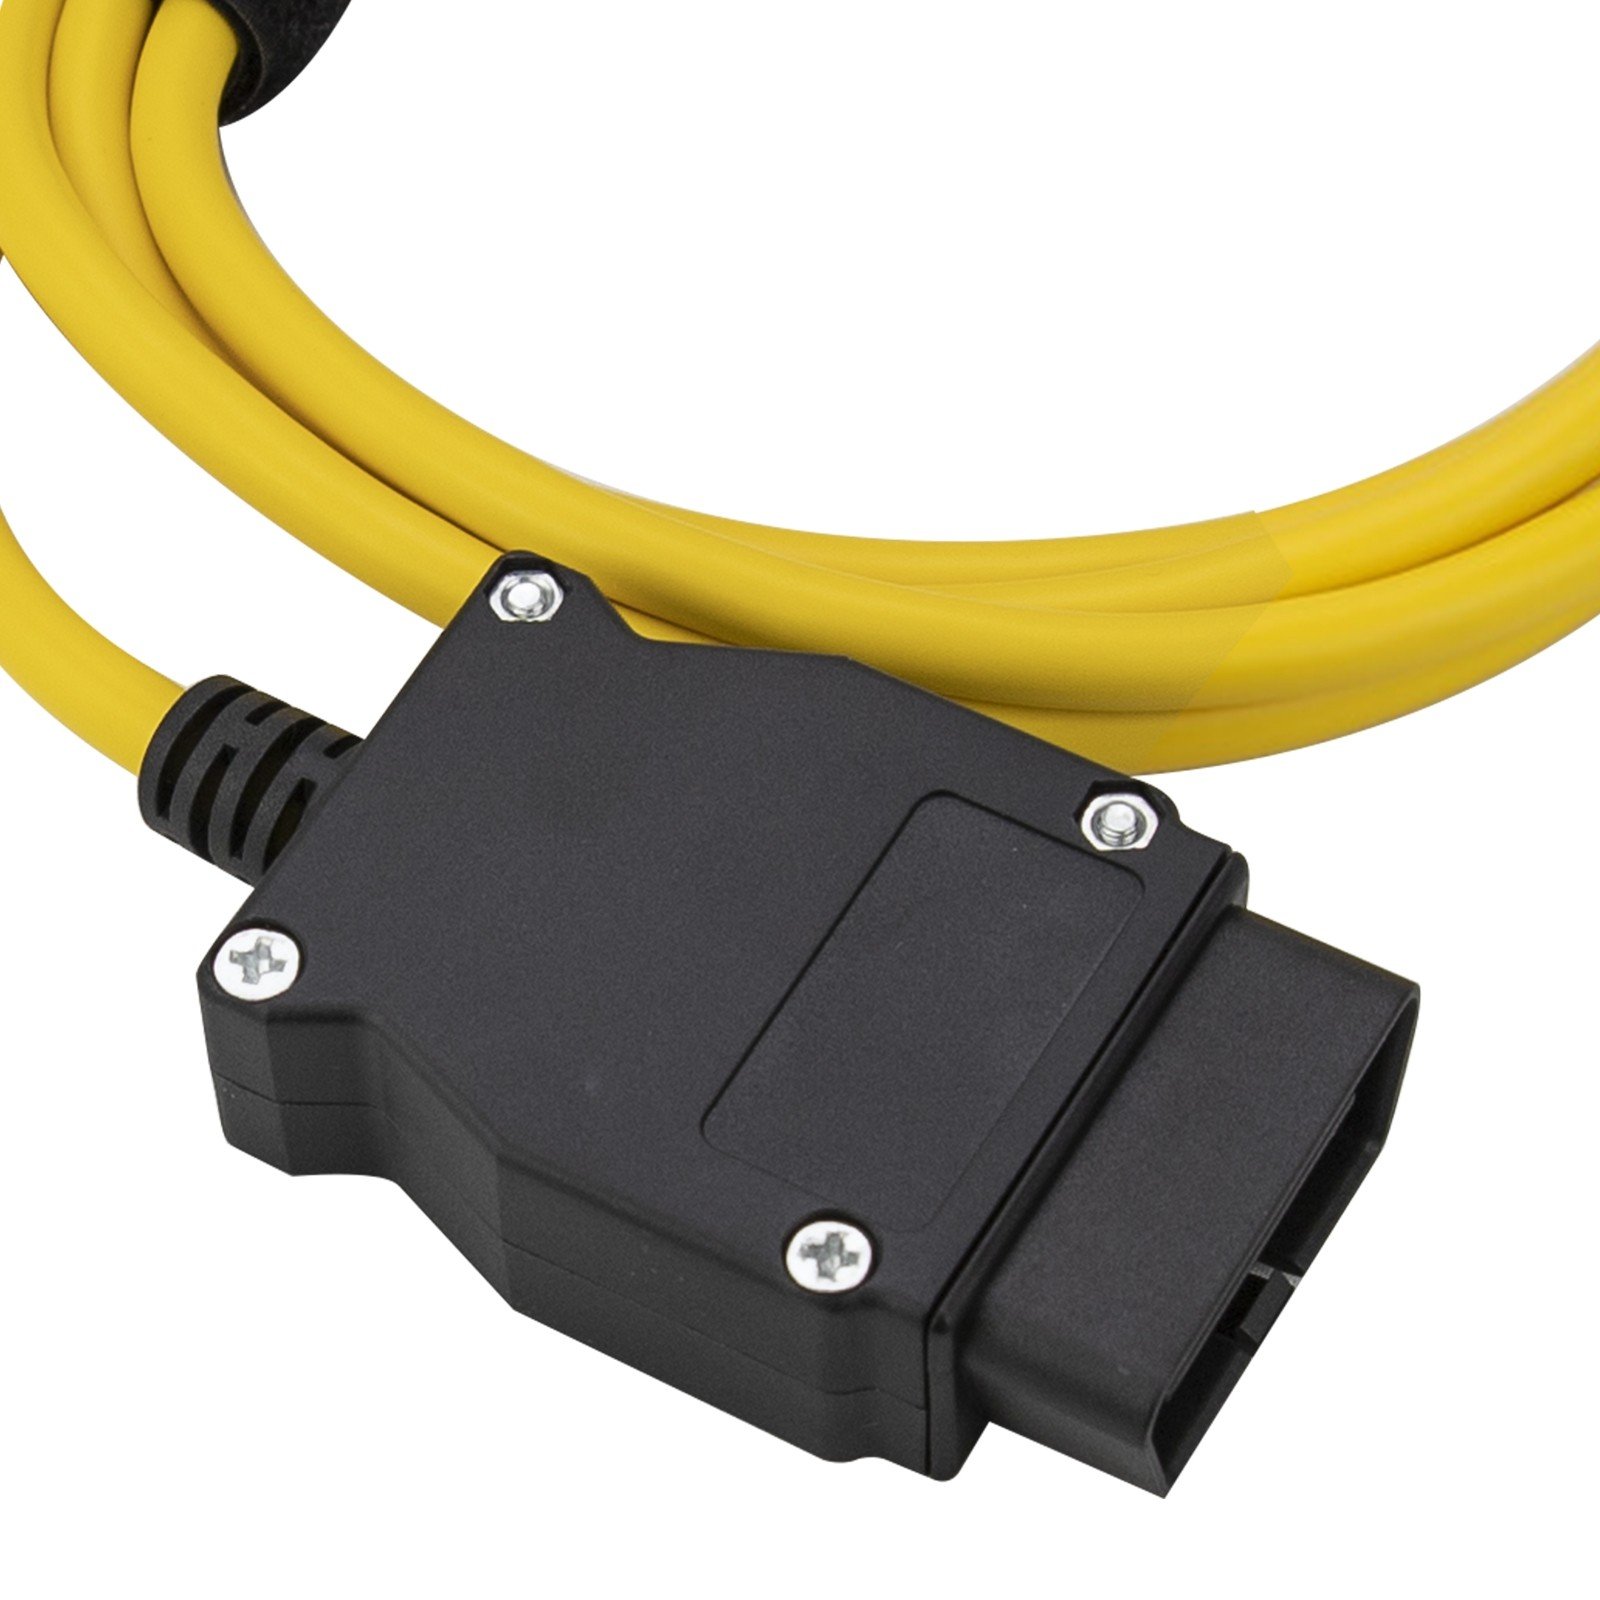 Ethernet to OBD Interface Cable E-SYS ICOM Coding F-series For BMW